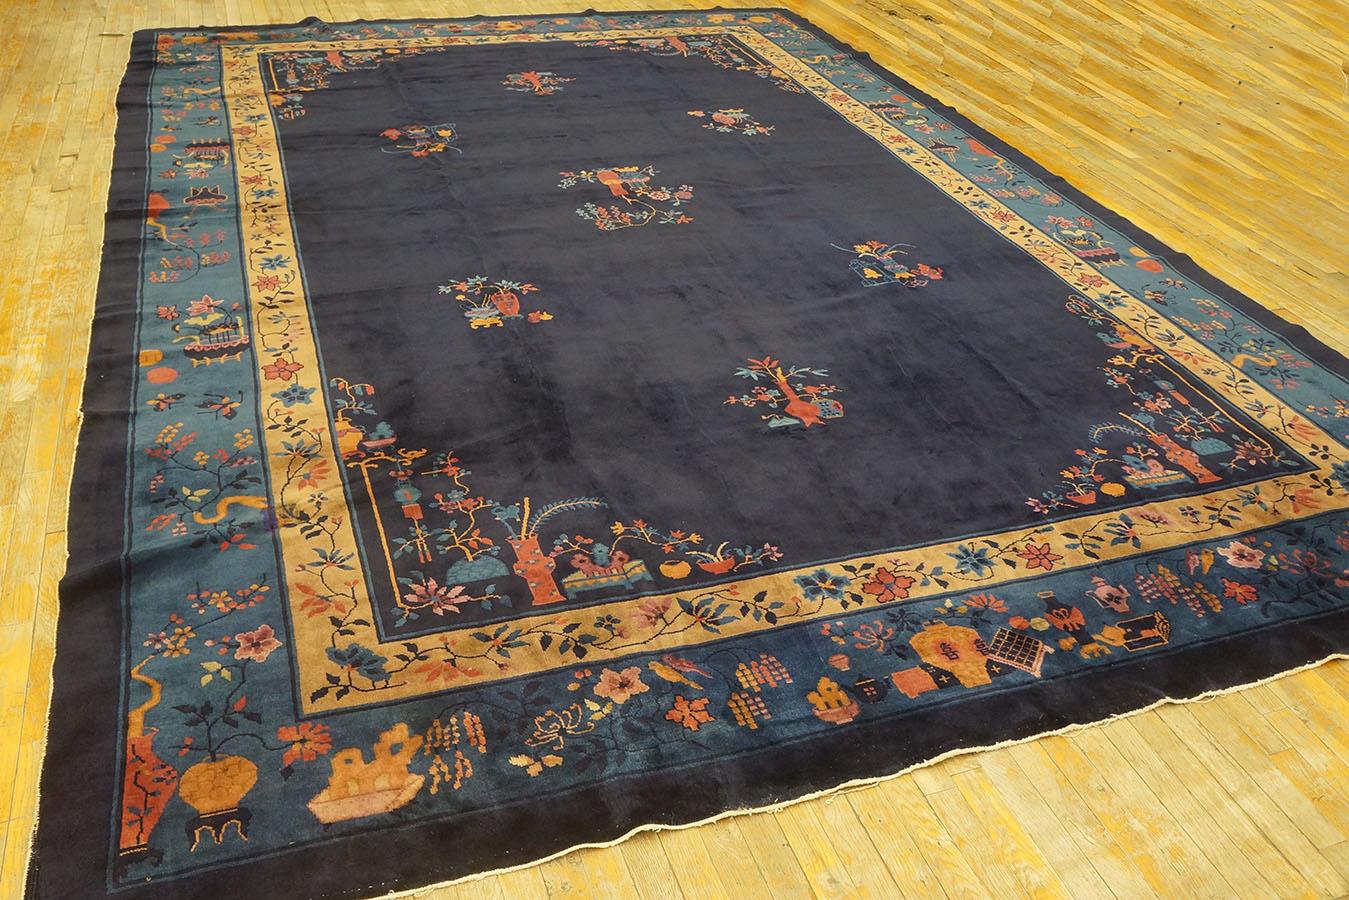 1920s Chinese Art Deco Carpet Navy background with blue border.
( 10' x 14'6'' - 305 x 442 )